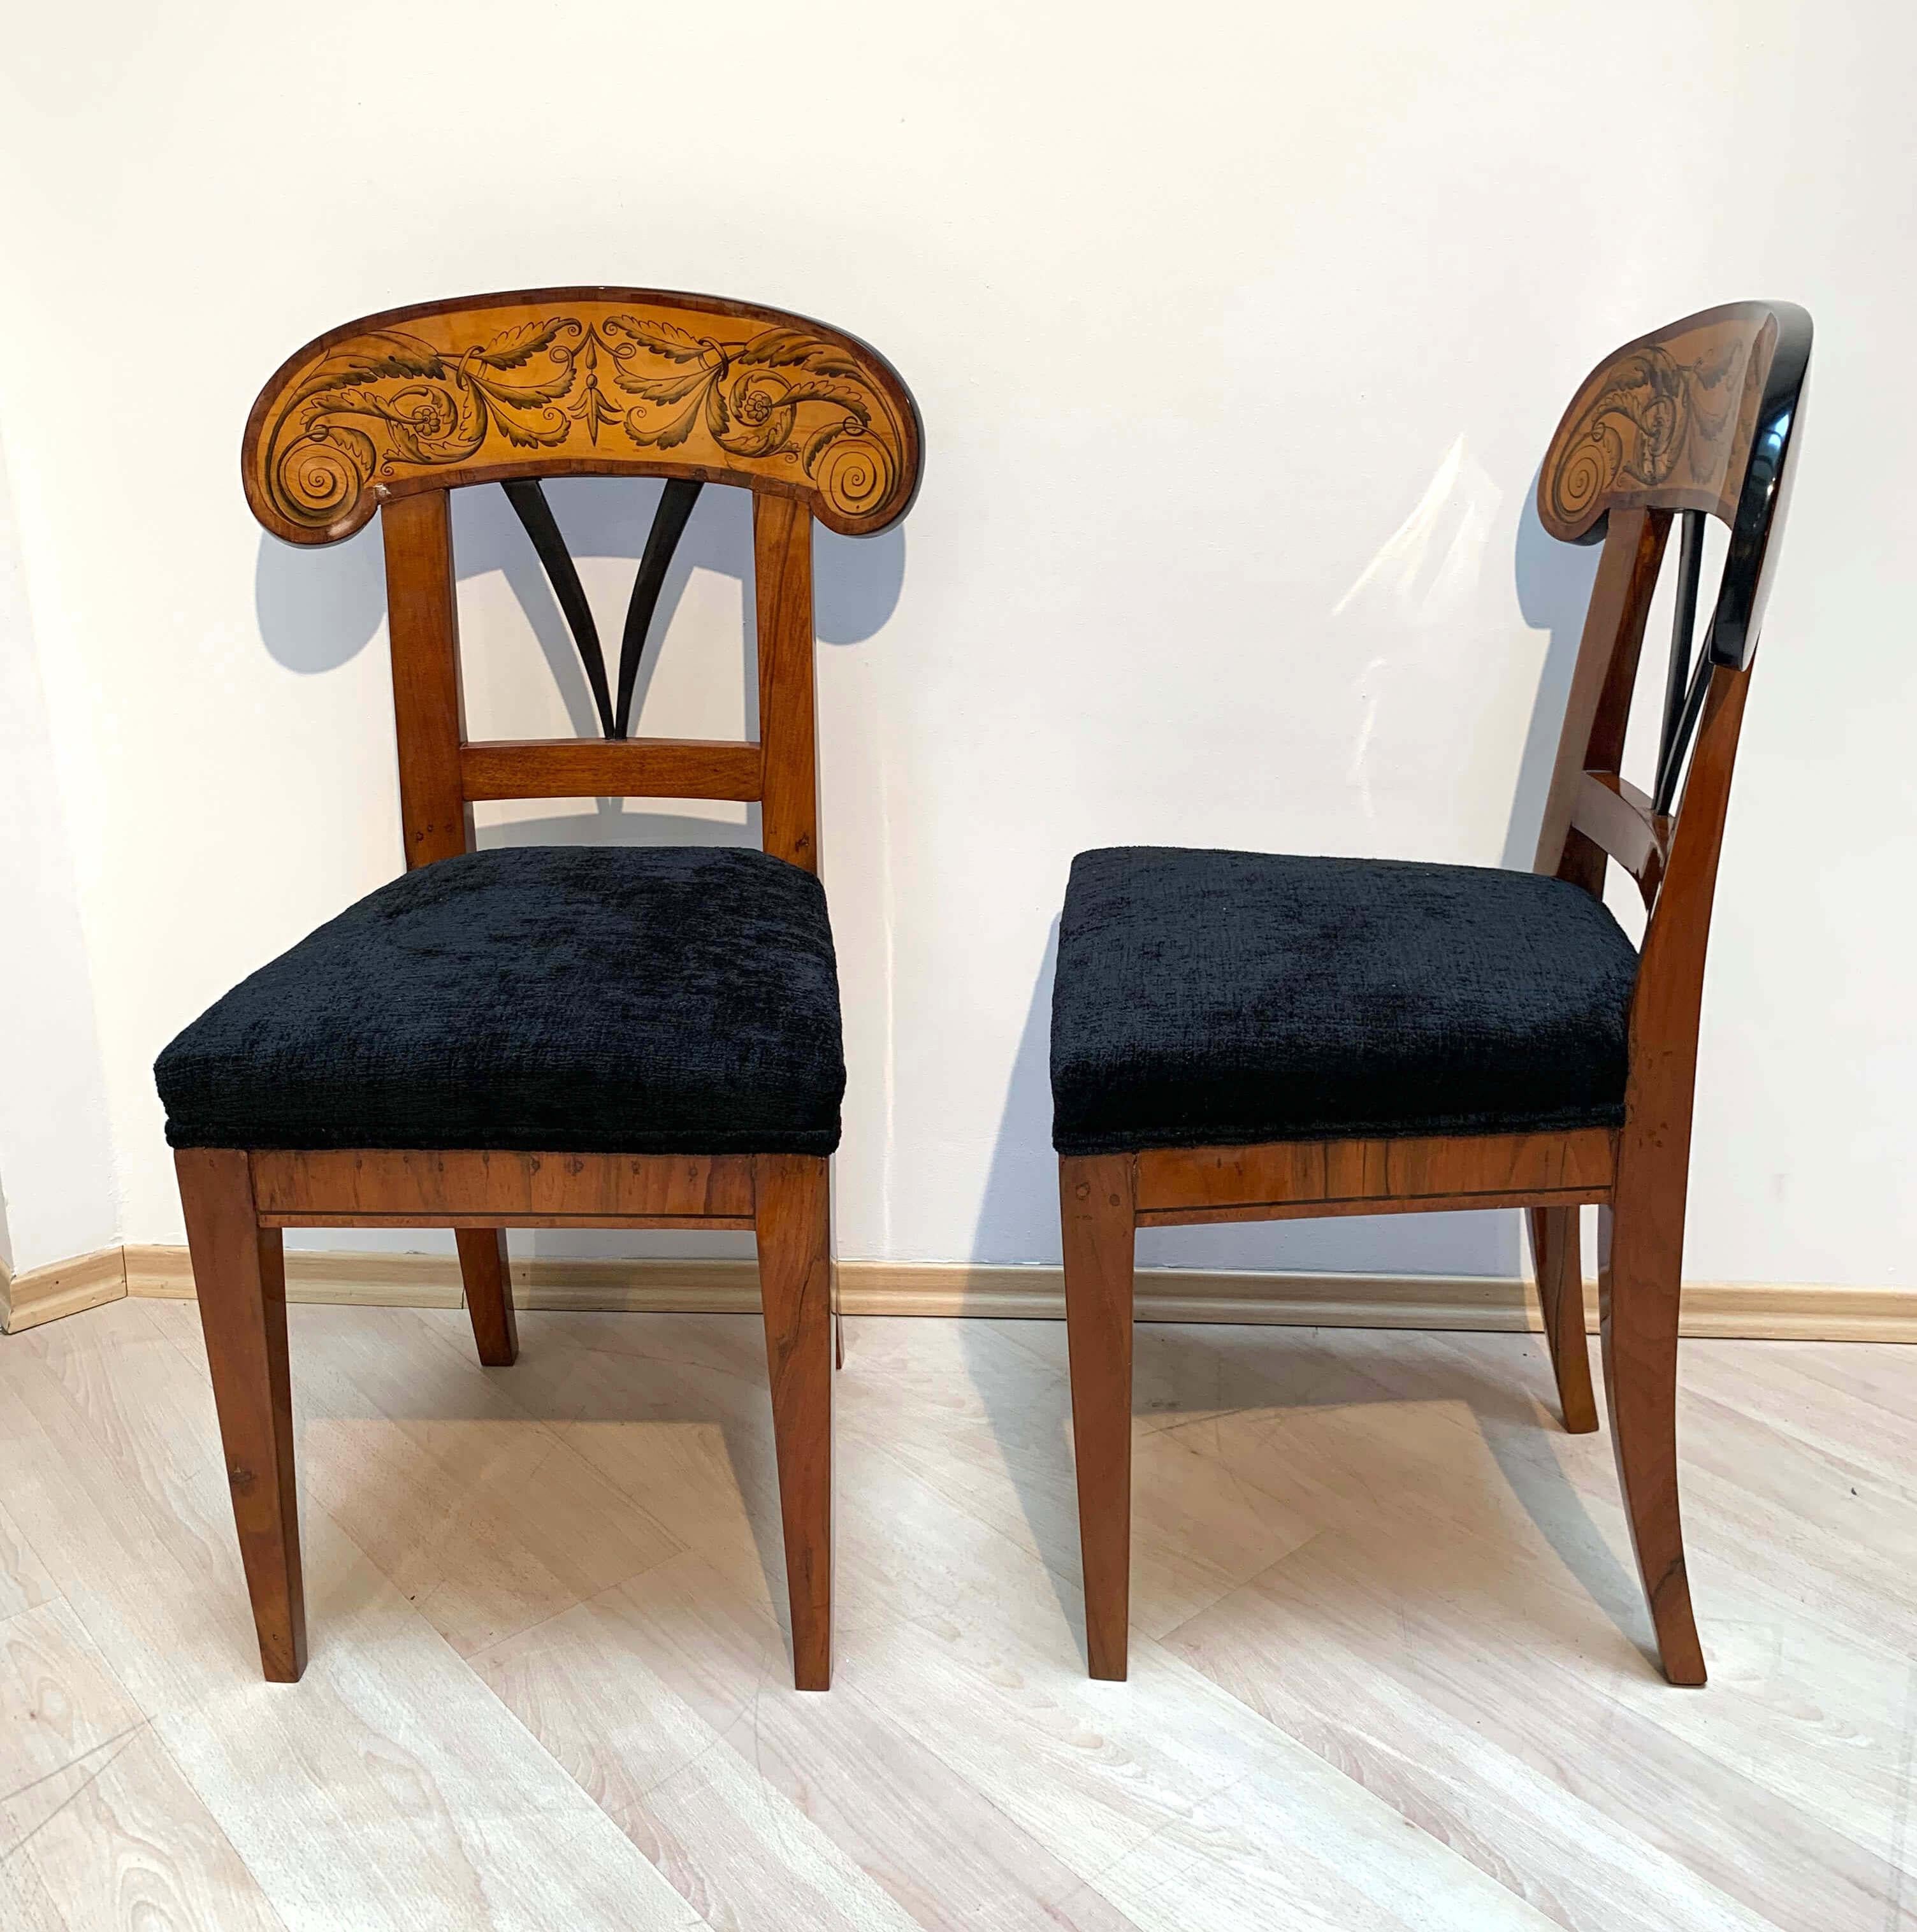 Pair of Biedermeier Shovel Chairs with Ink Painting, Walnut, South German, 1830s In Good Condition For Sale In Regensburg, DE